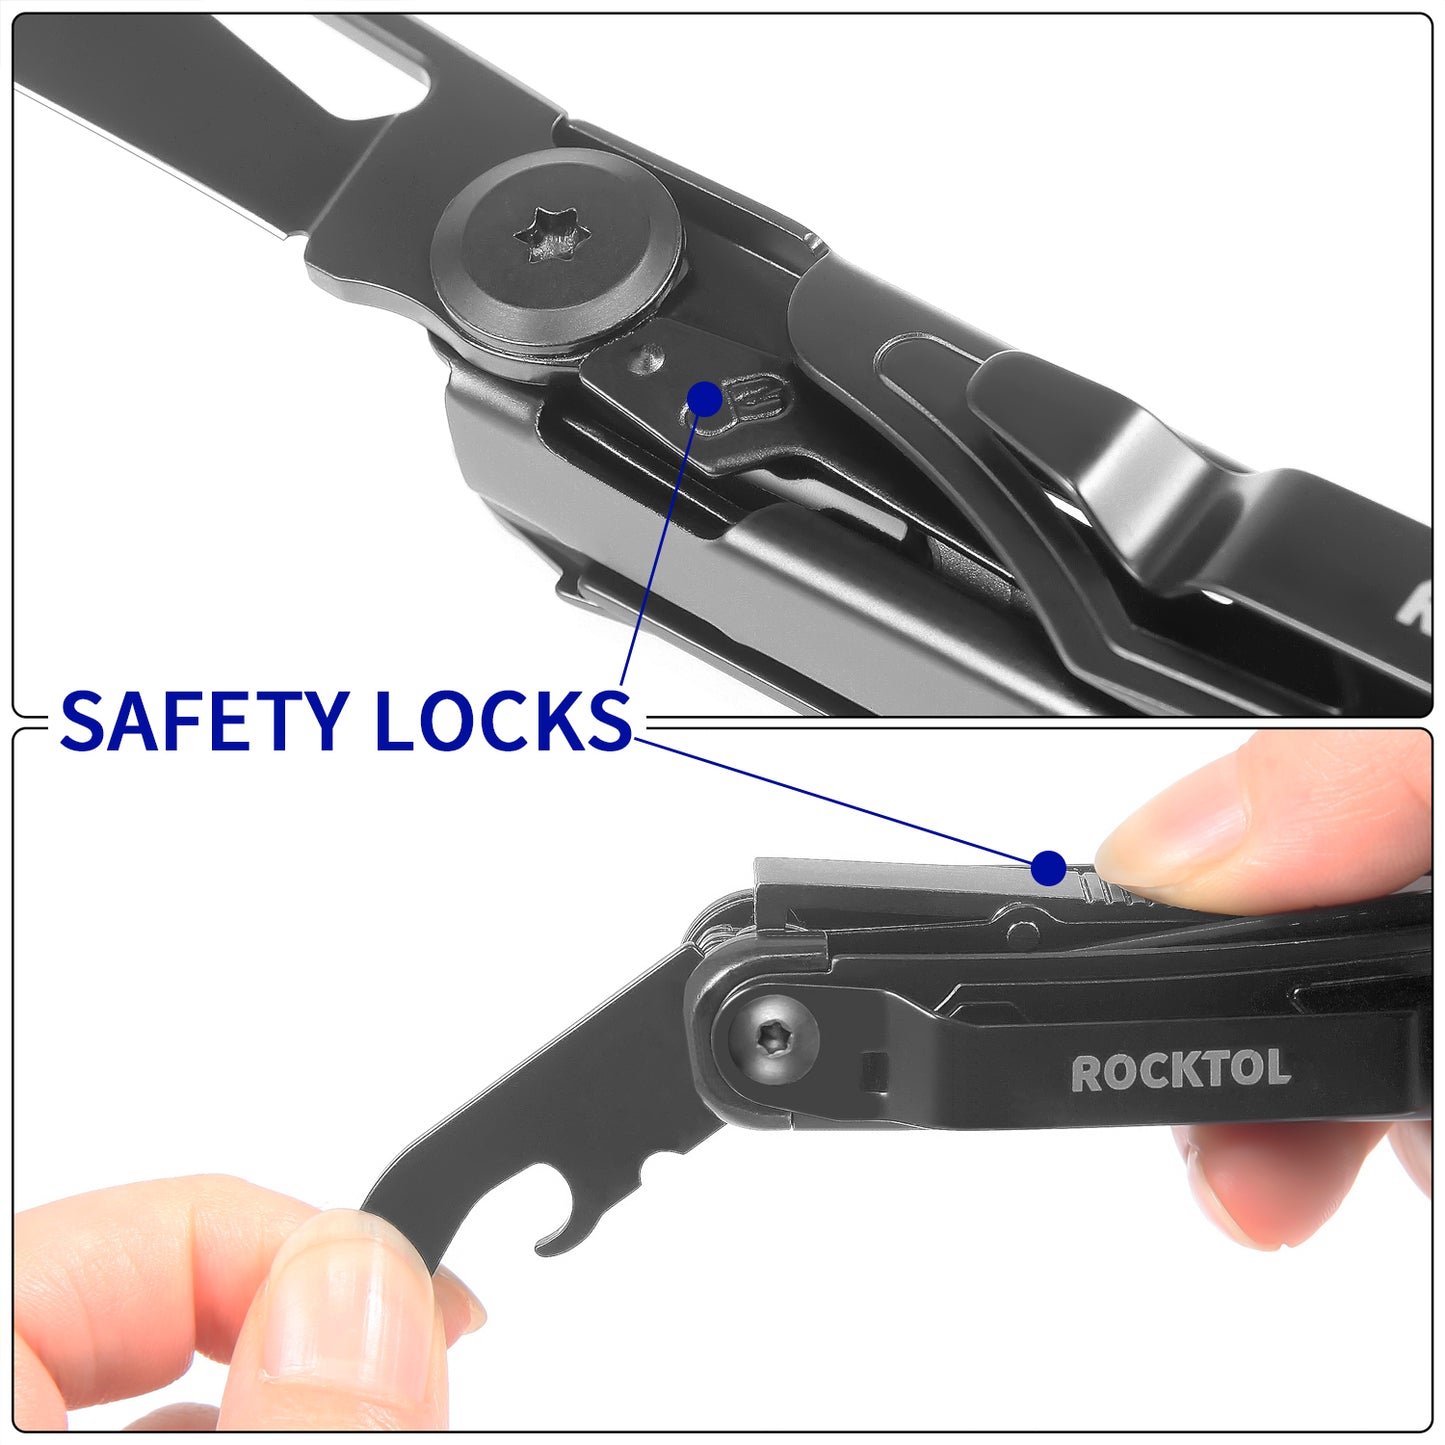 ROCKTOL Black Multitool Knife, 12-in-1 Pocket Multi-tool Knife with 2.68” Pocket Knife and Leather Sheath, EDC Gear for Camping,Hiking,Survival